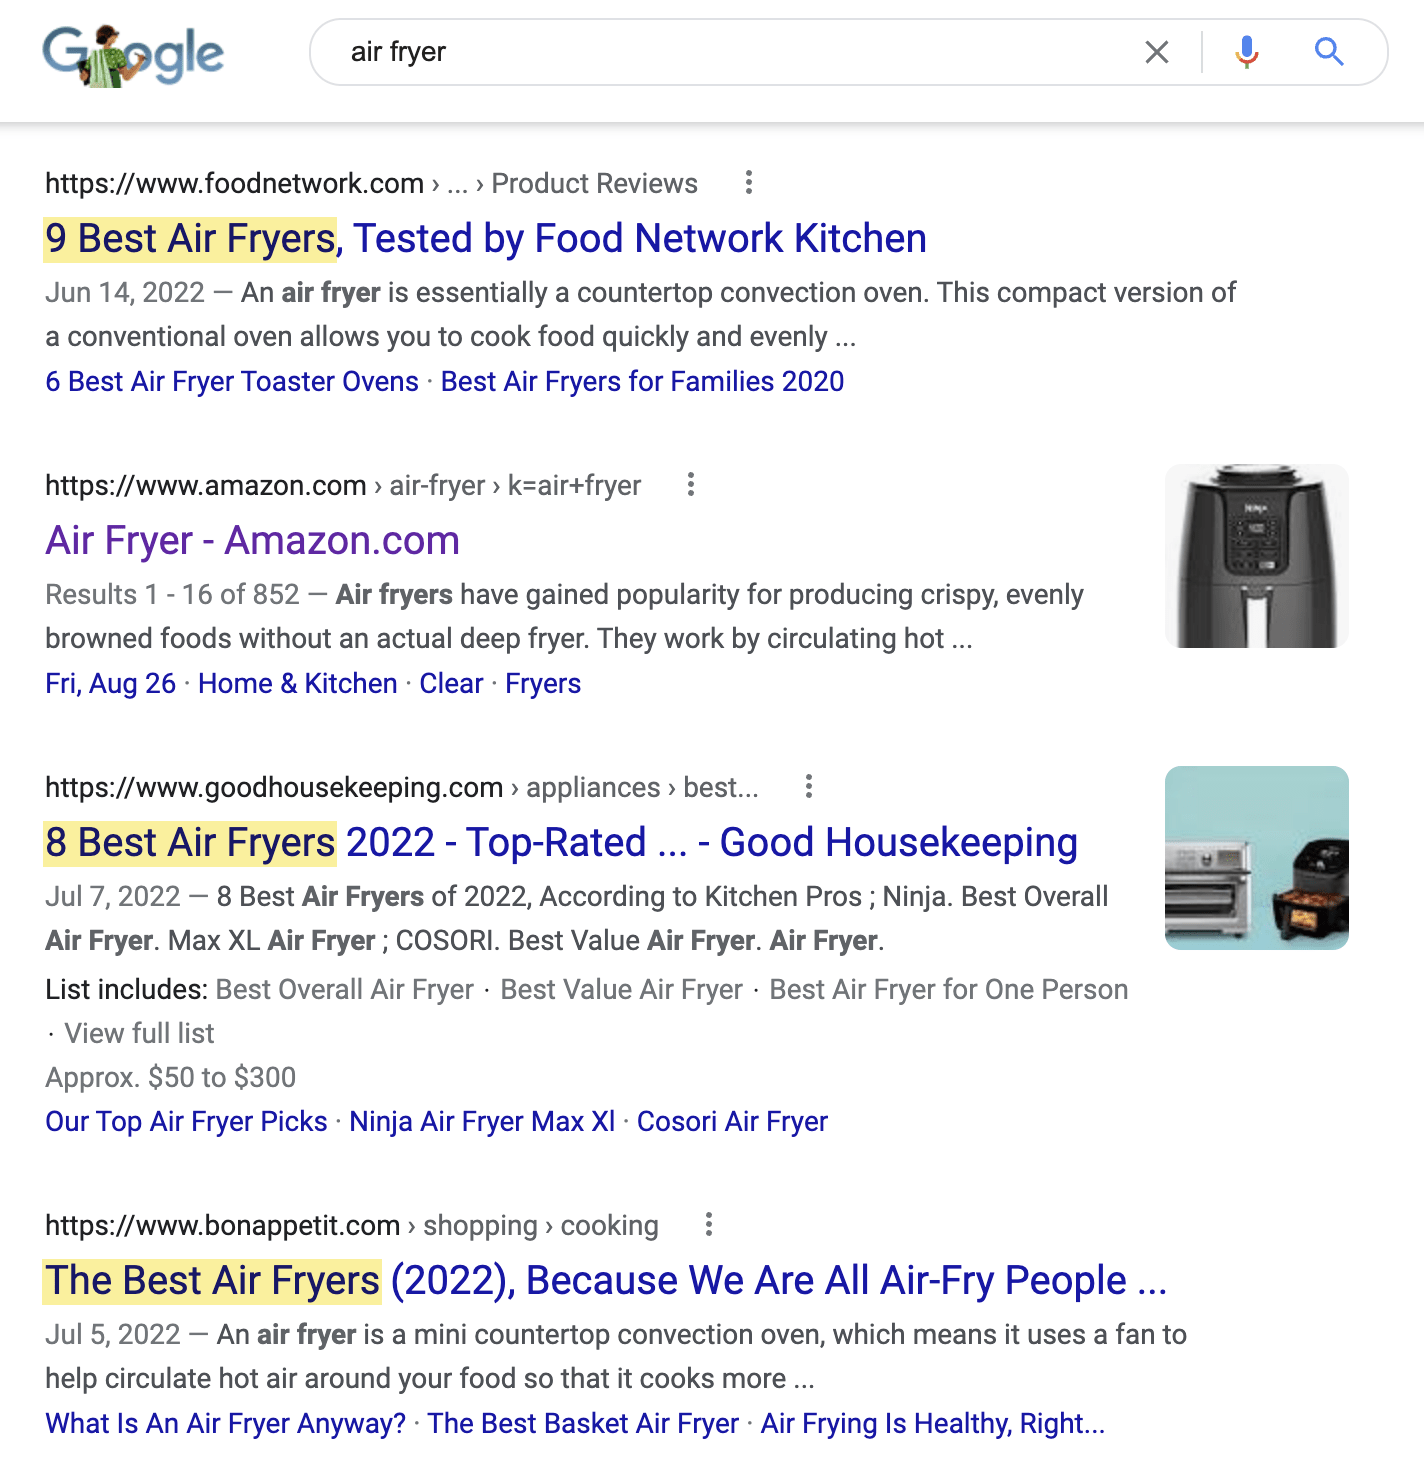 People searching for "air fryer" are in research mode, not buying mode